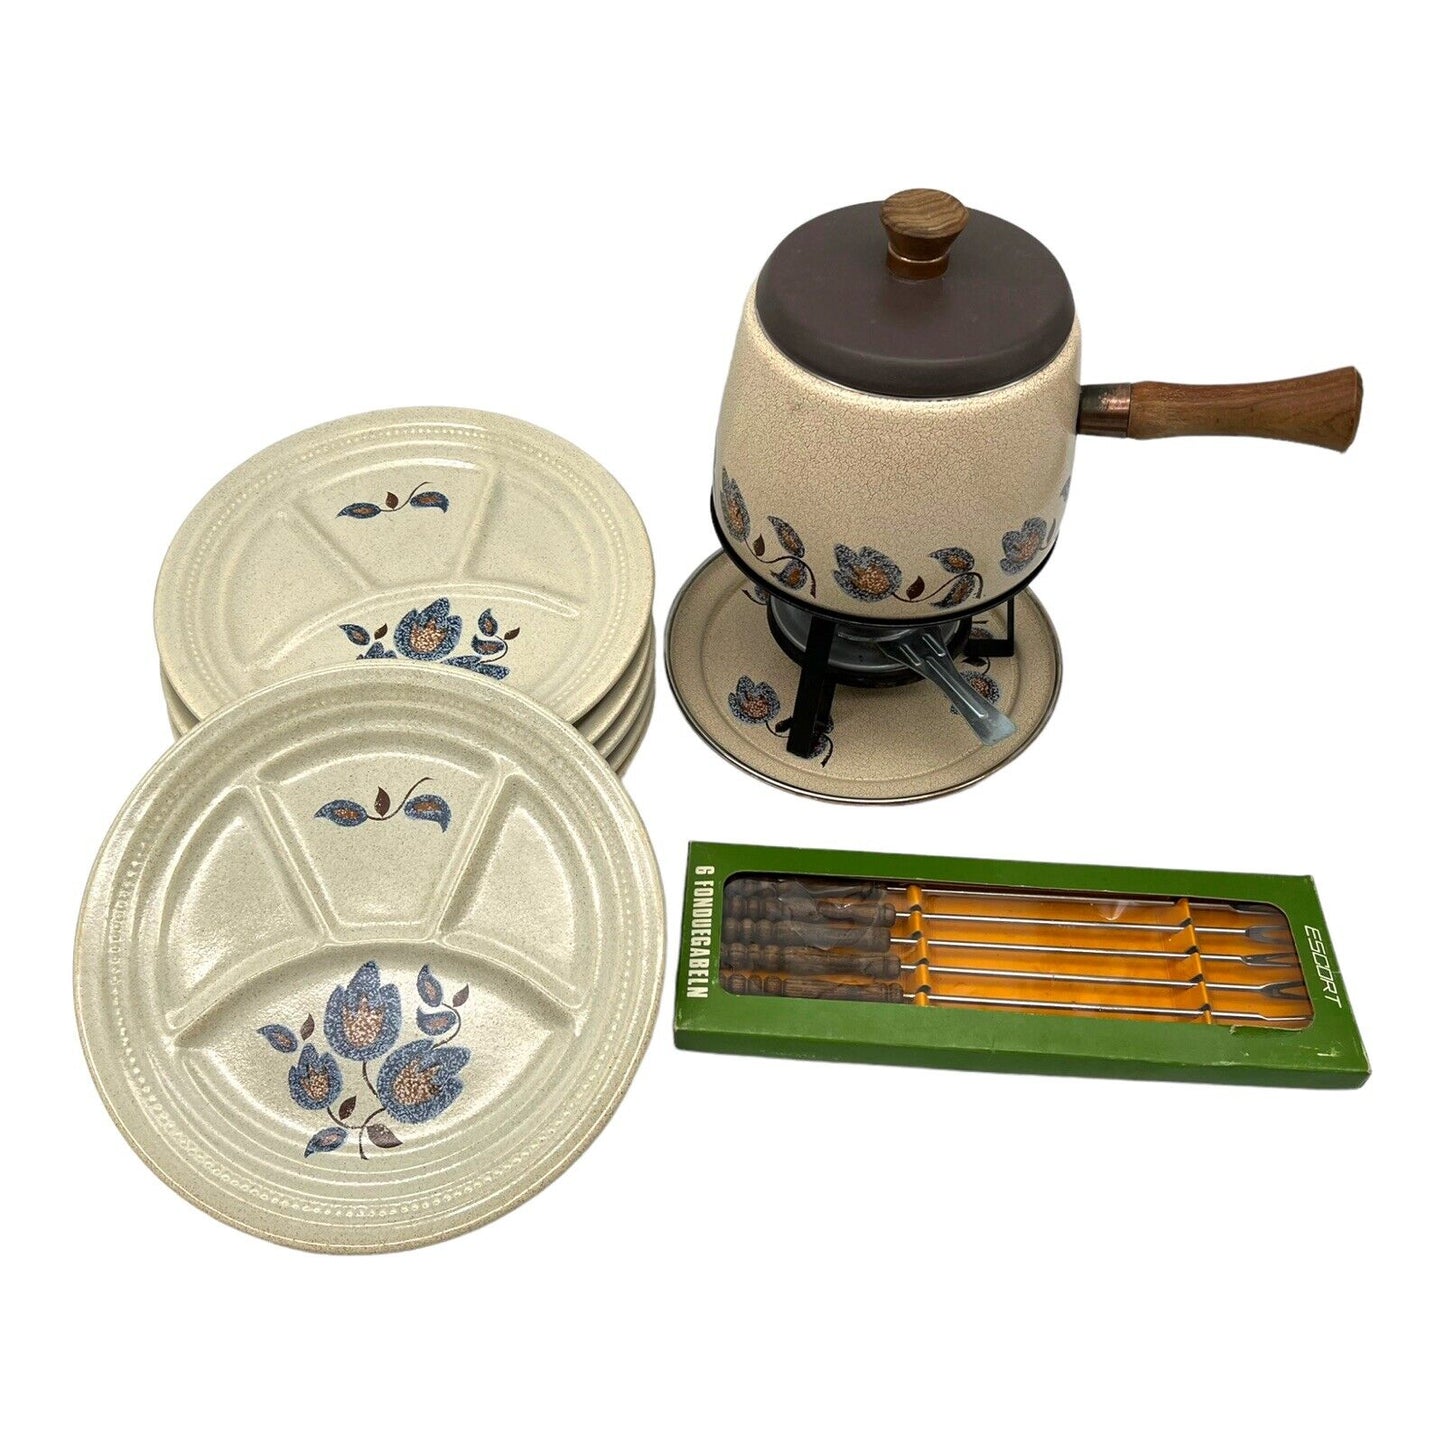 French retro vintage fondue set sold by All Things French Store